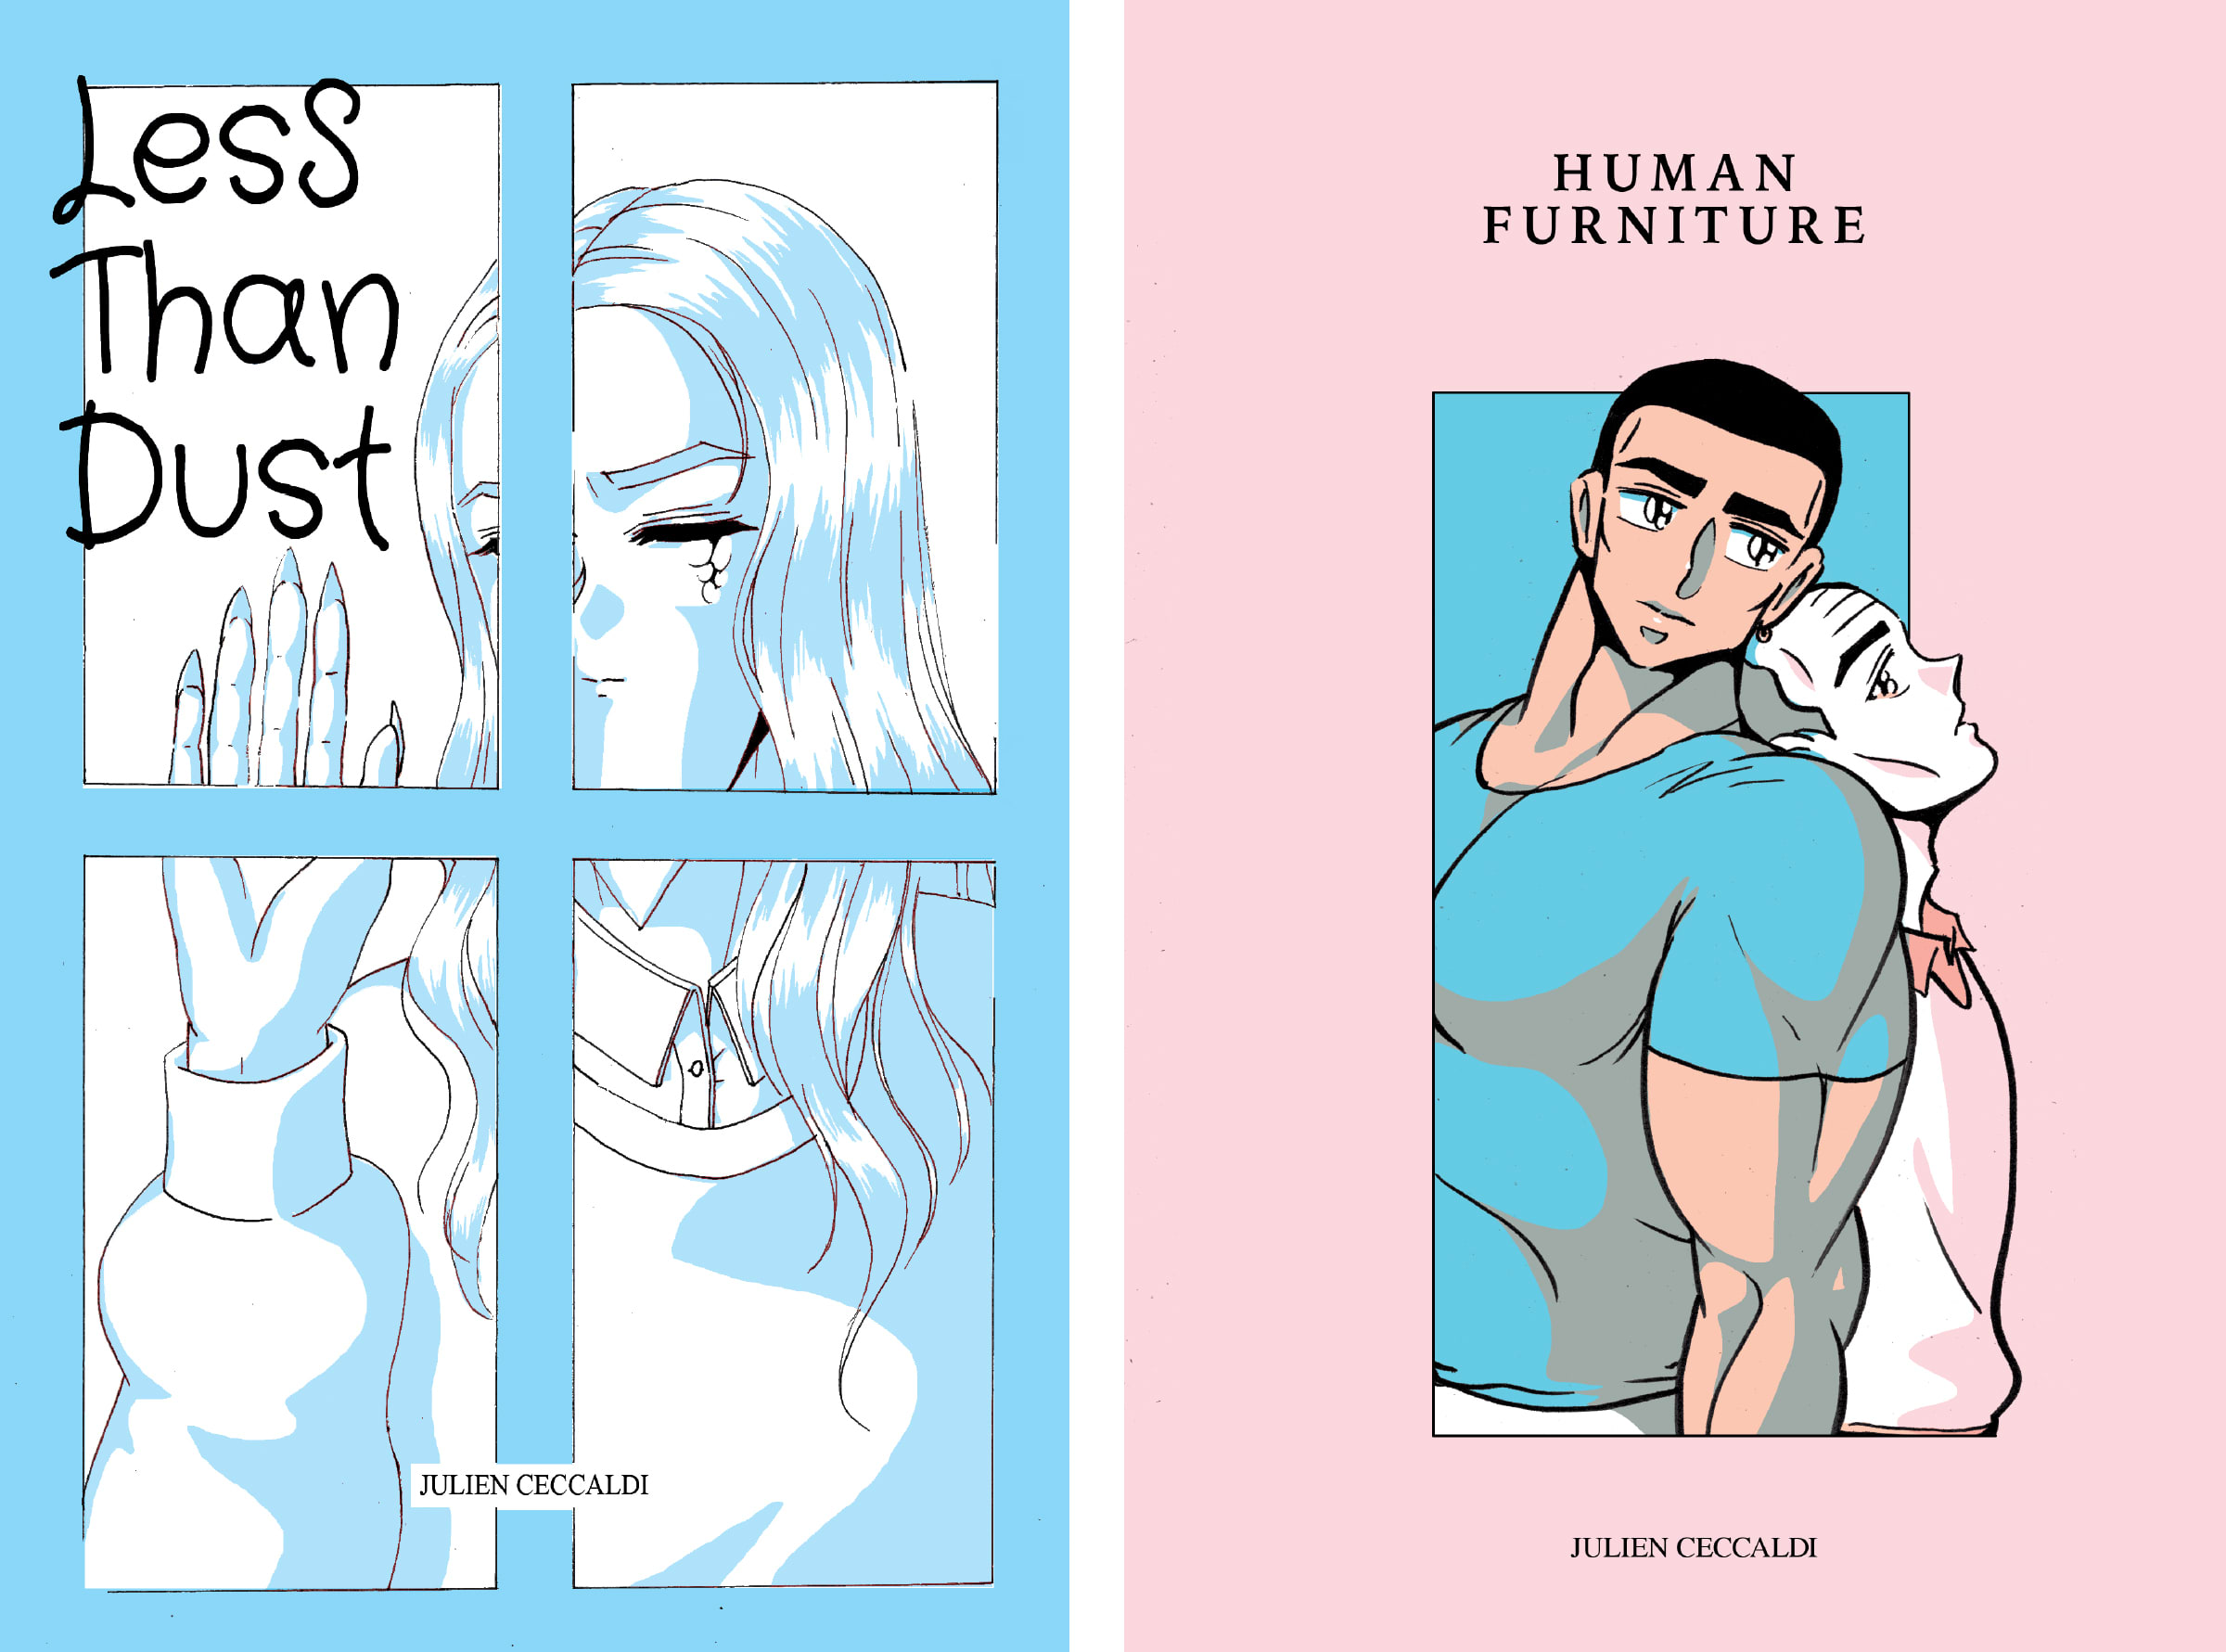 Covers of two books by Julien Ceccaldi: Less Than Dust (2014) and Human Furniture (2017). Courtesy of the artist.